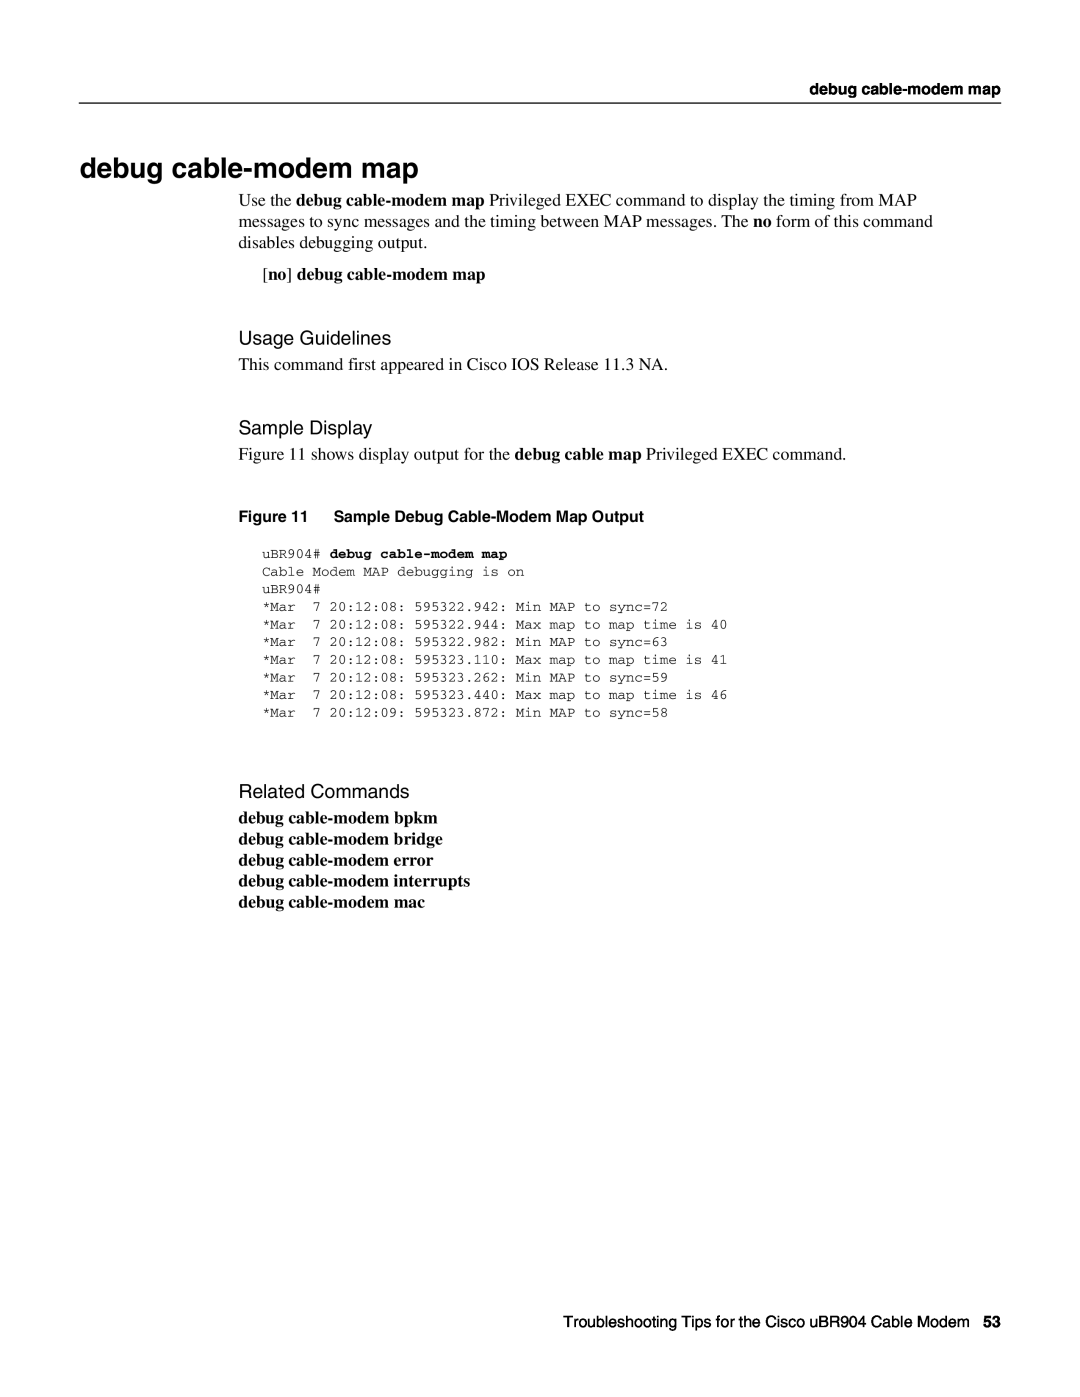 Cisco Systems UBR904 manual no debug cable-modem map, Usage Guidelines, Sample Display, Related Commands 